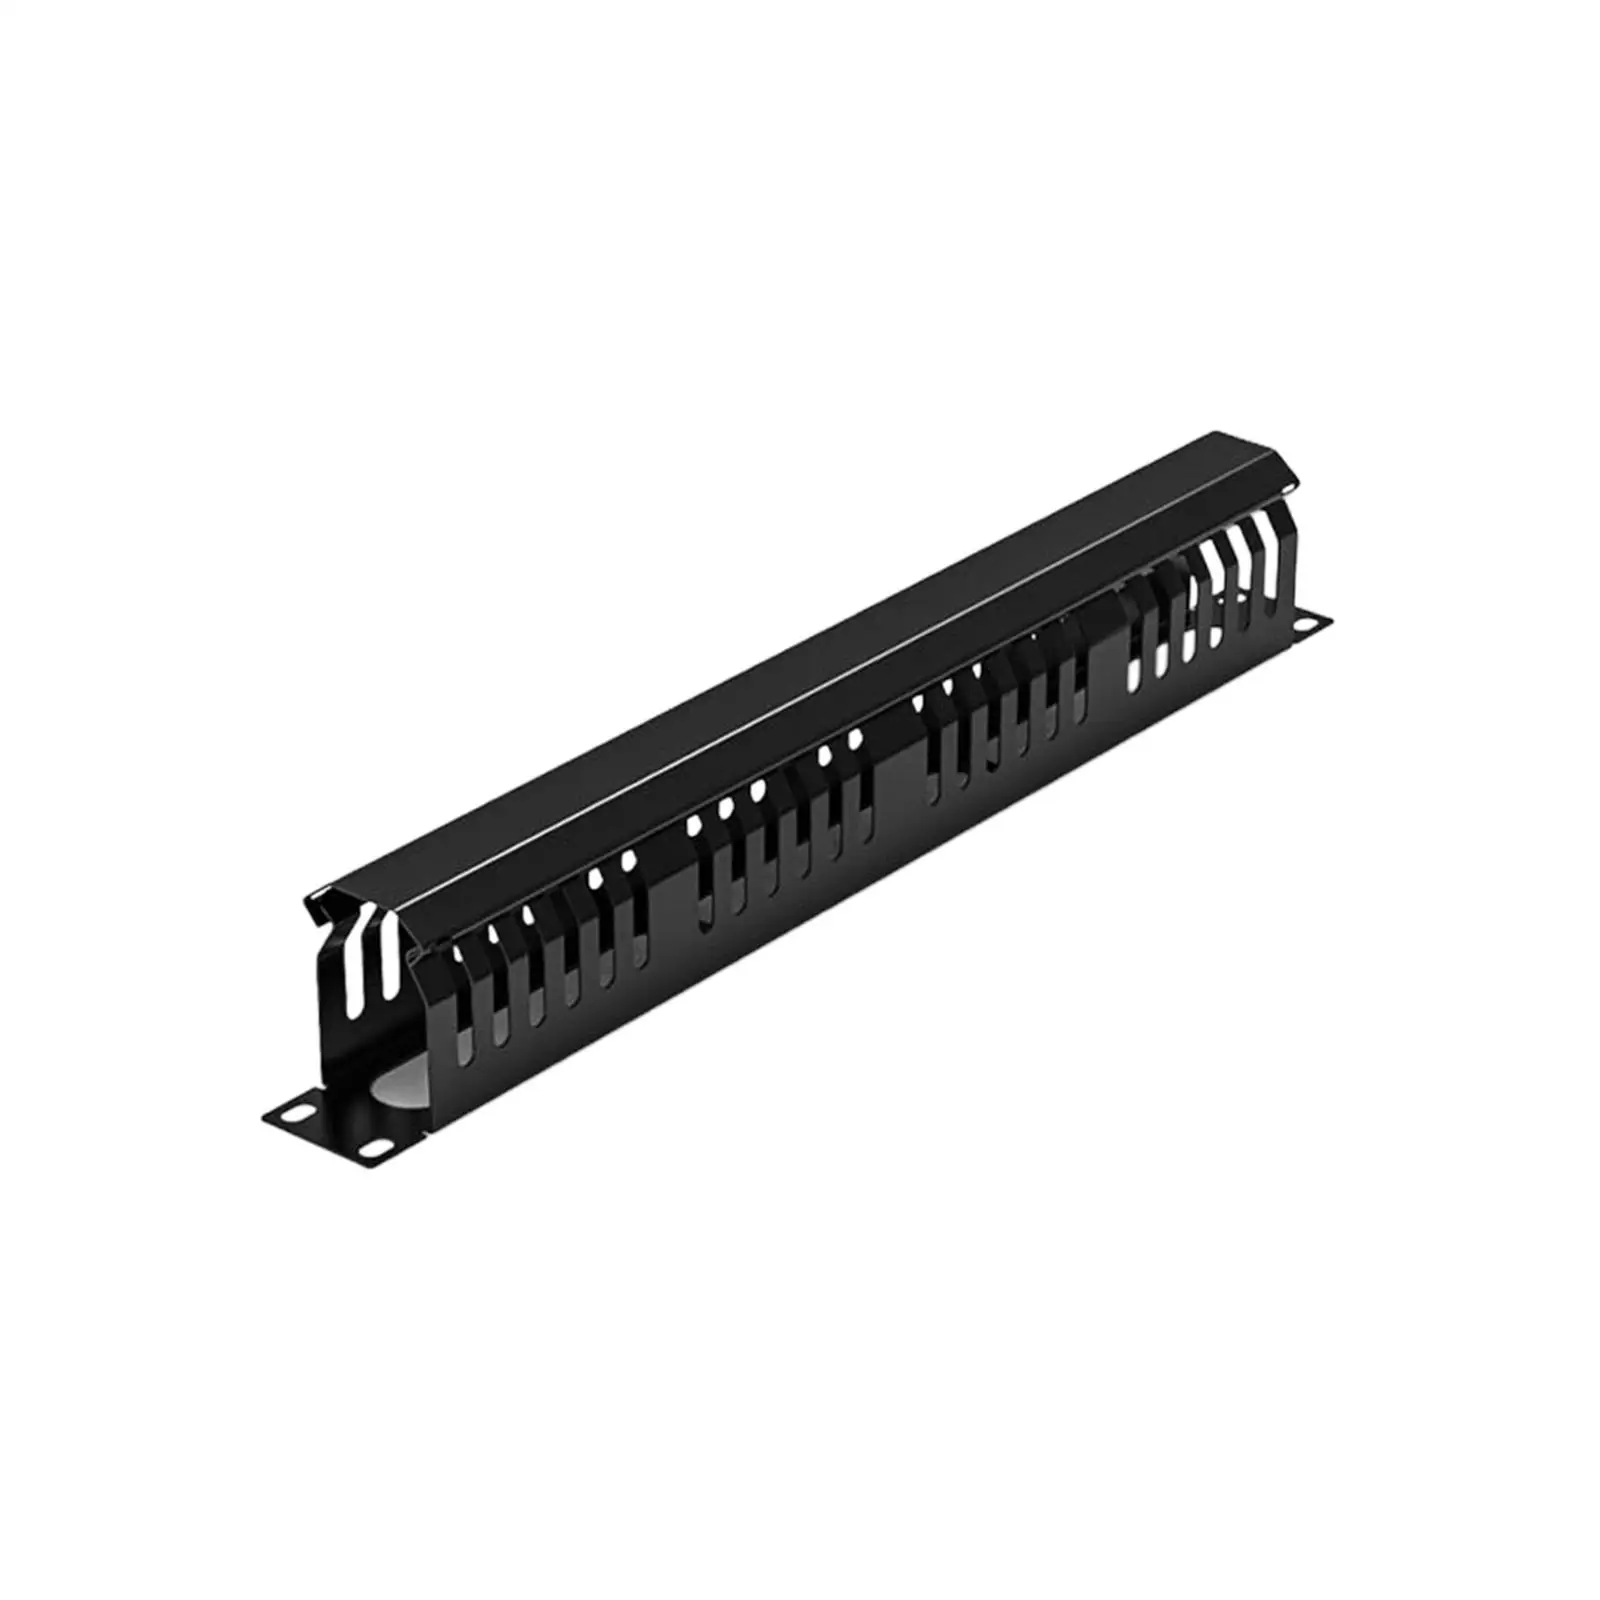 Cable Server Rack under Desk Tray Support Cord Manager Panel Wire Organizer Offices 24 Slot Wire Organizers for 1U 19 inch